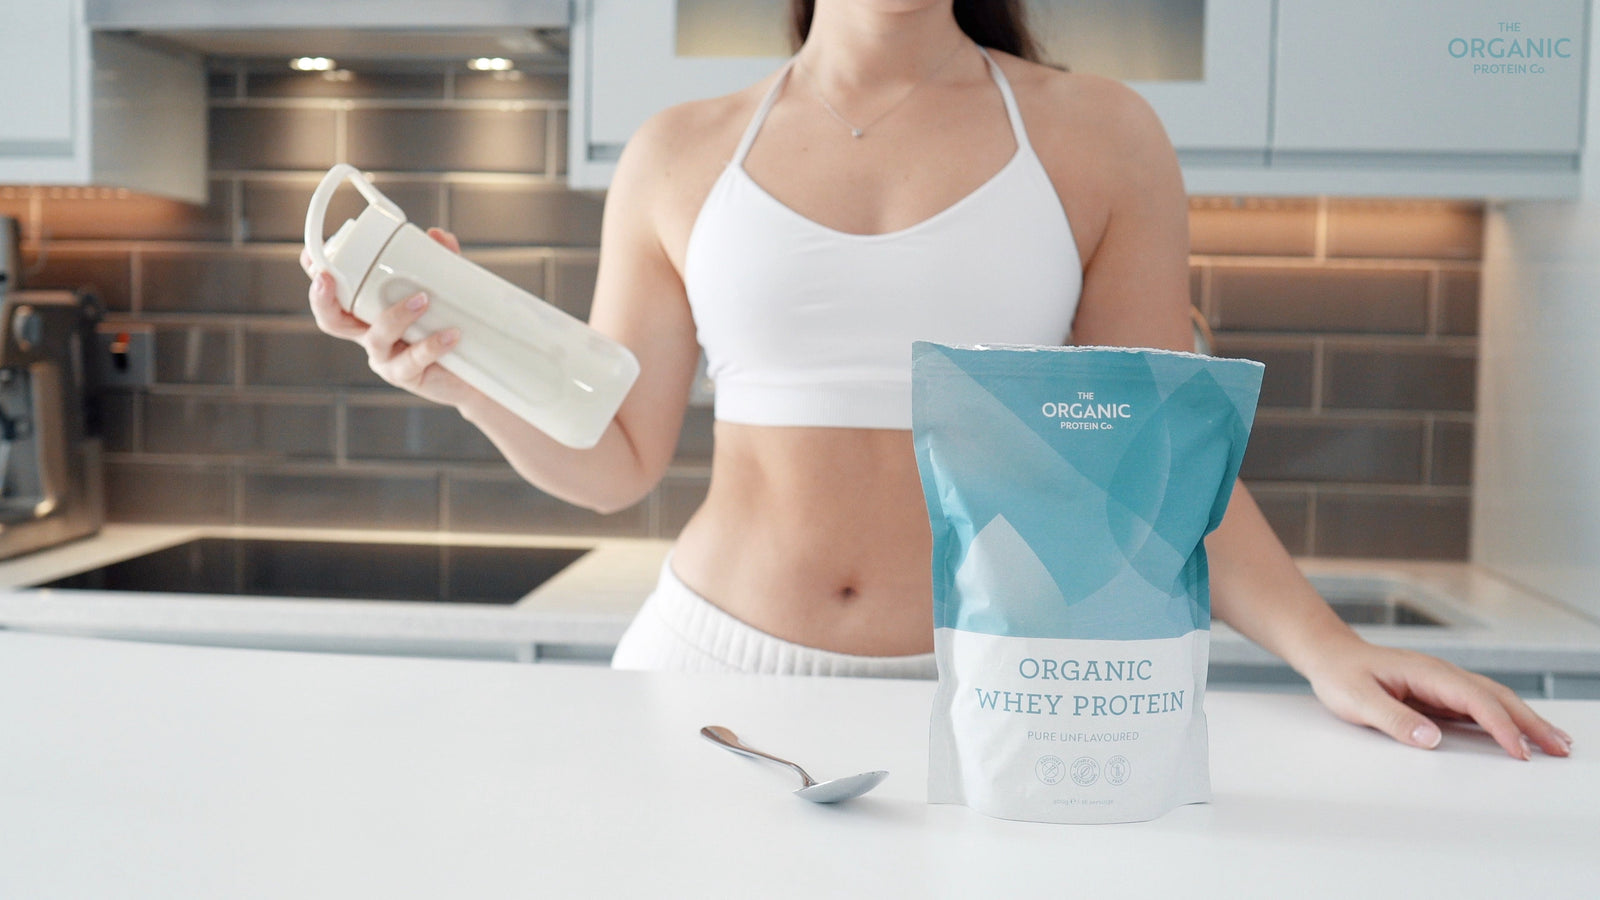 Finding the best protein powder for your health & wellbeing